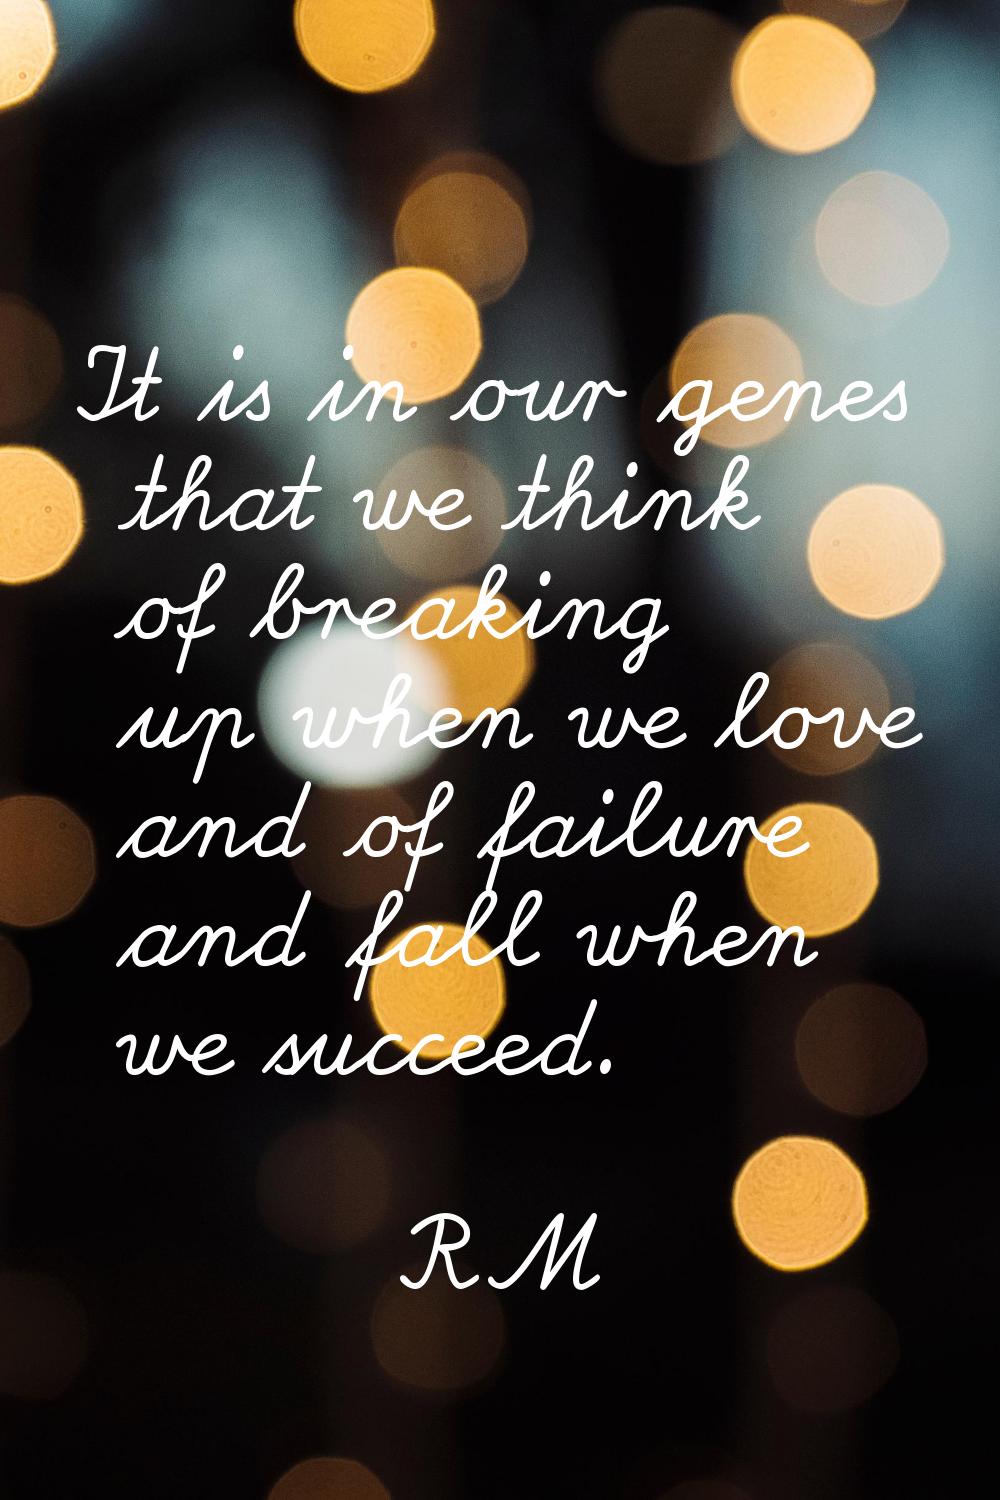 It is in our genes that we think of breaking up when we love and of failure and fall when we succee